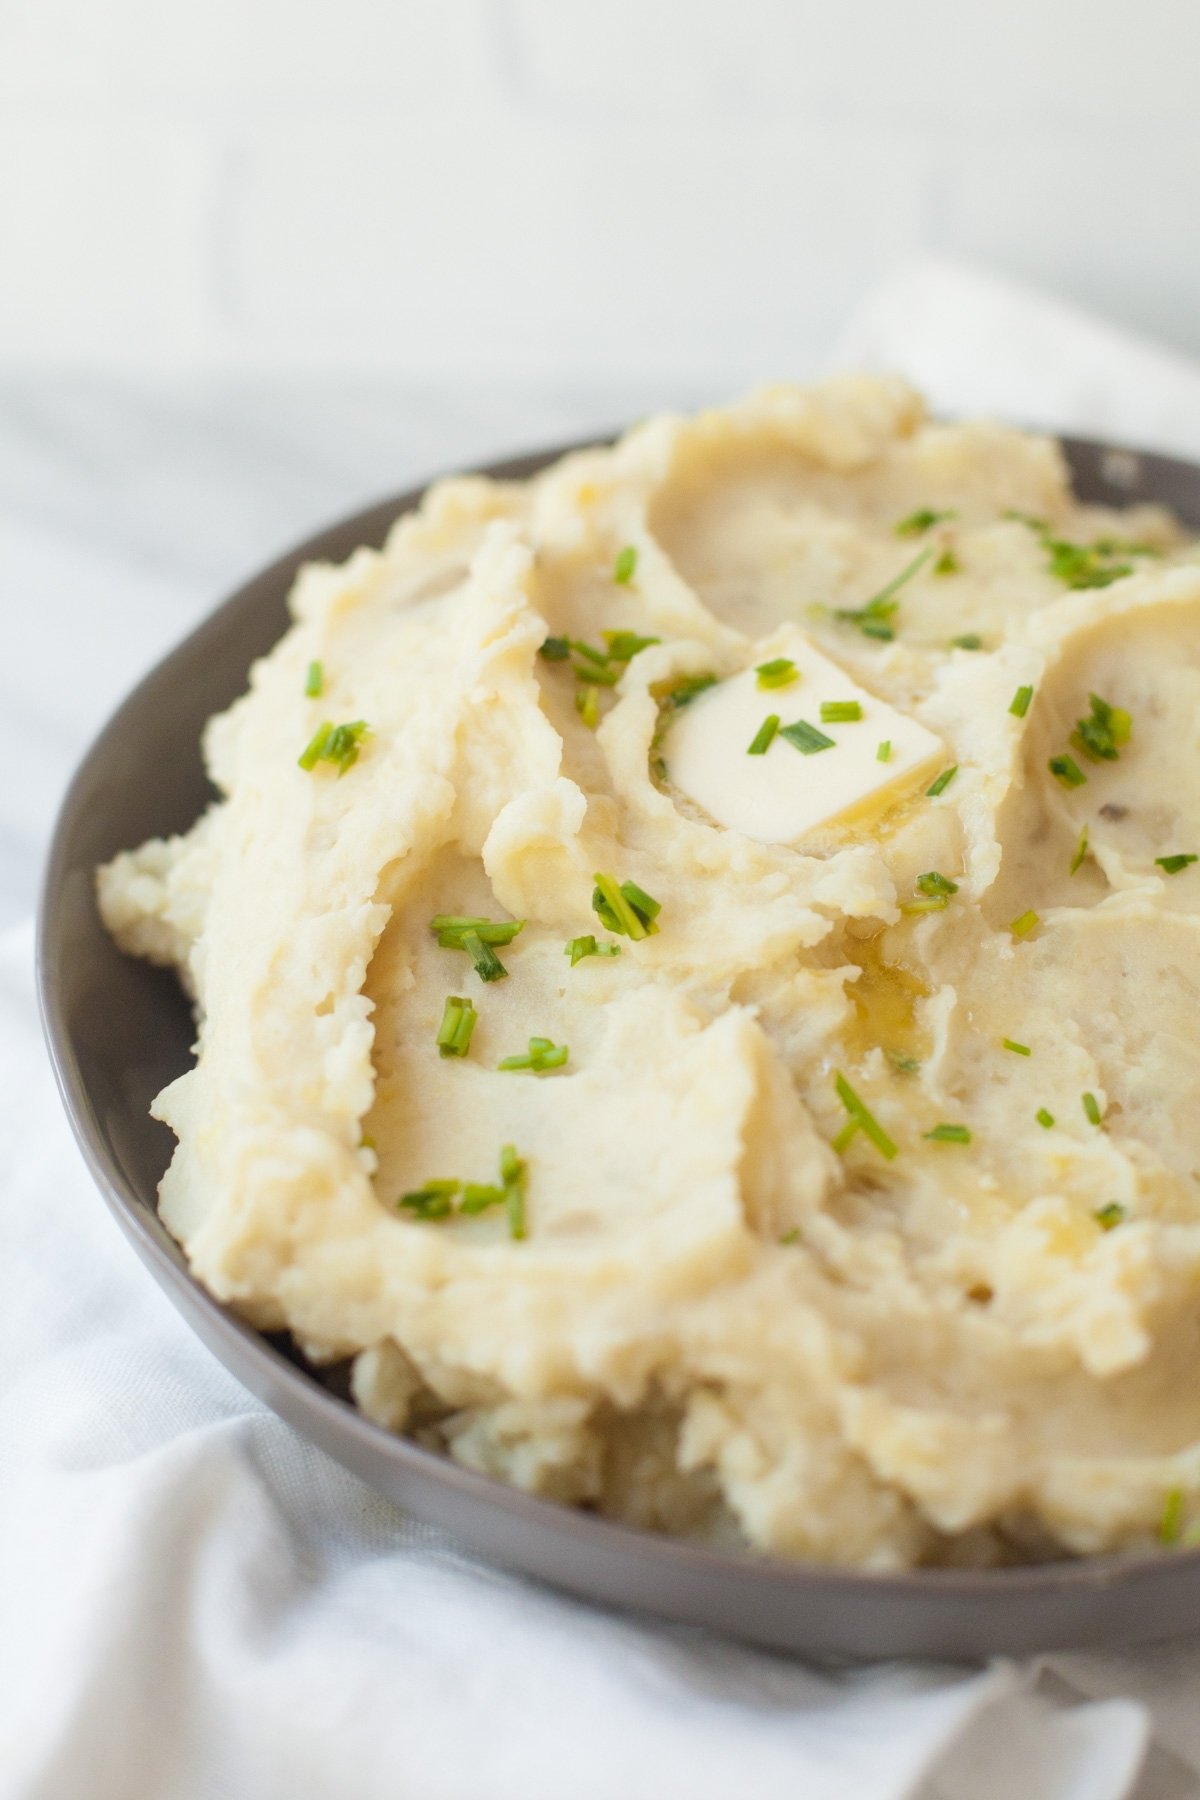 10 Fashionable Dinner Ideas With Mashed Potatoes the best ever slow cooker mashed potatoes wholefully 2022